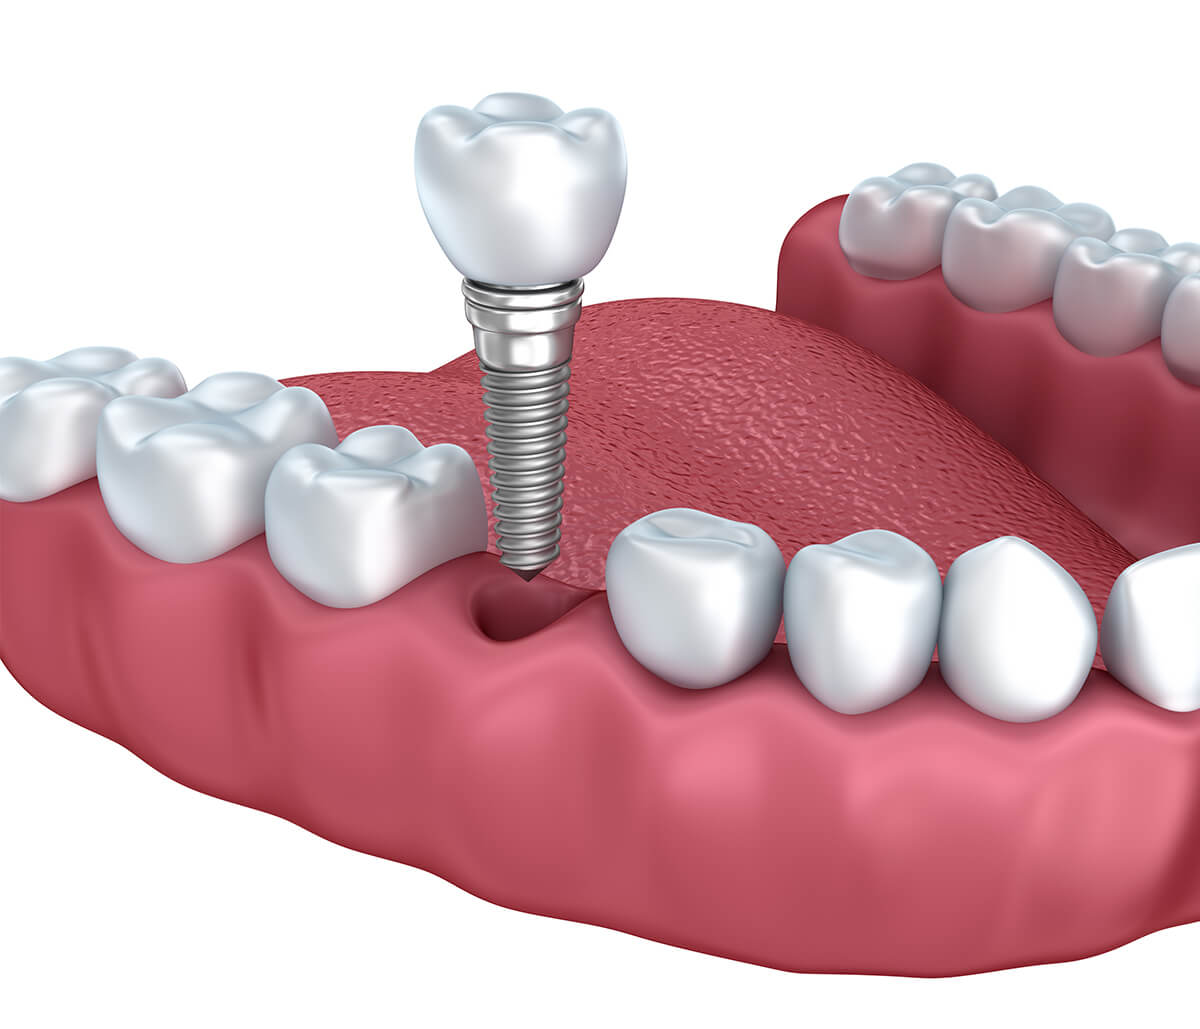 healthy smiles with dental implant crowns, bridges, and dentures